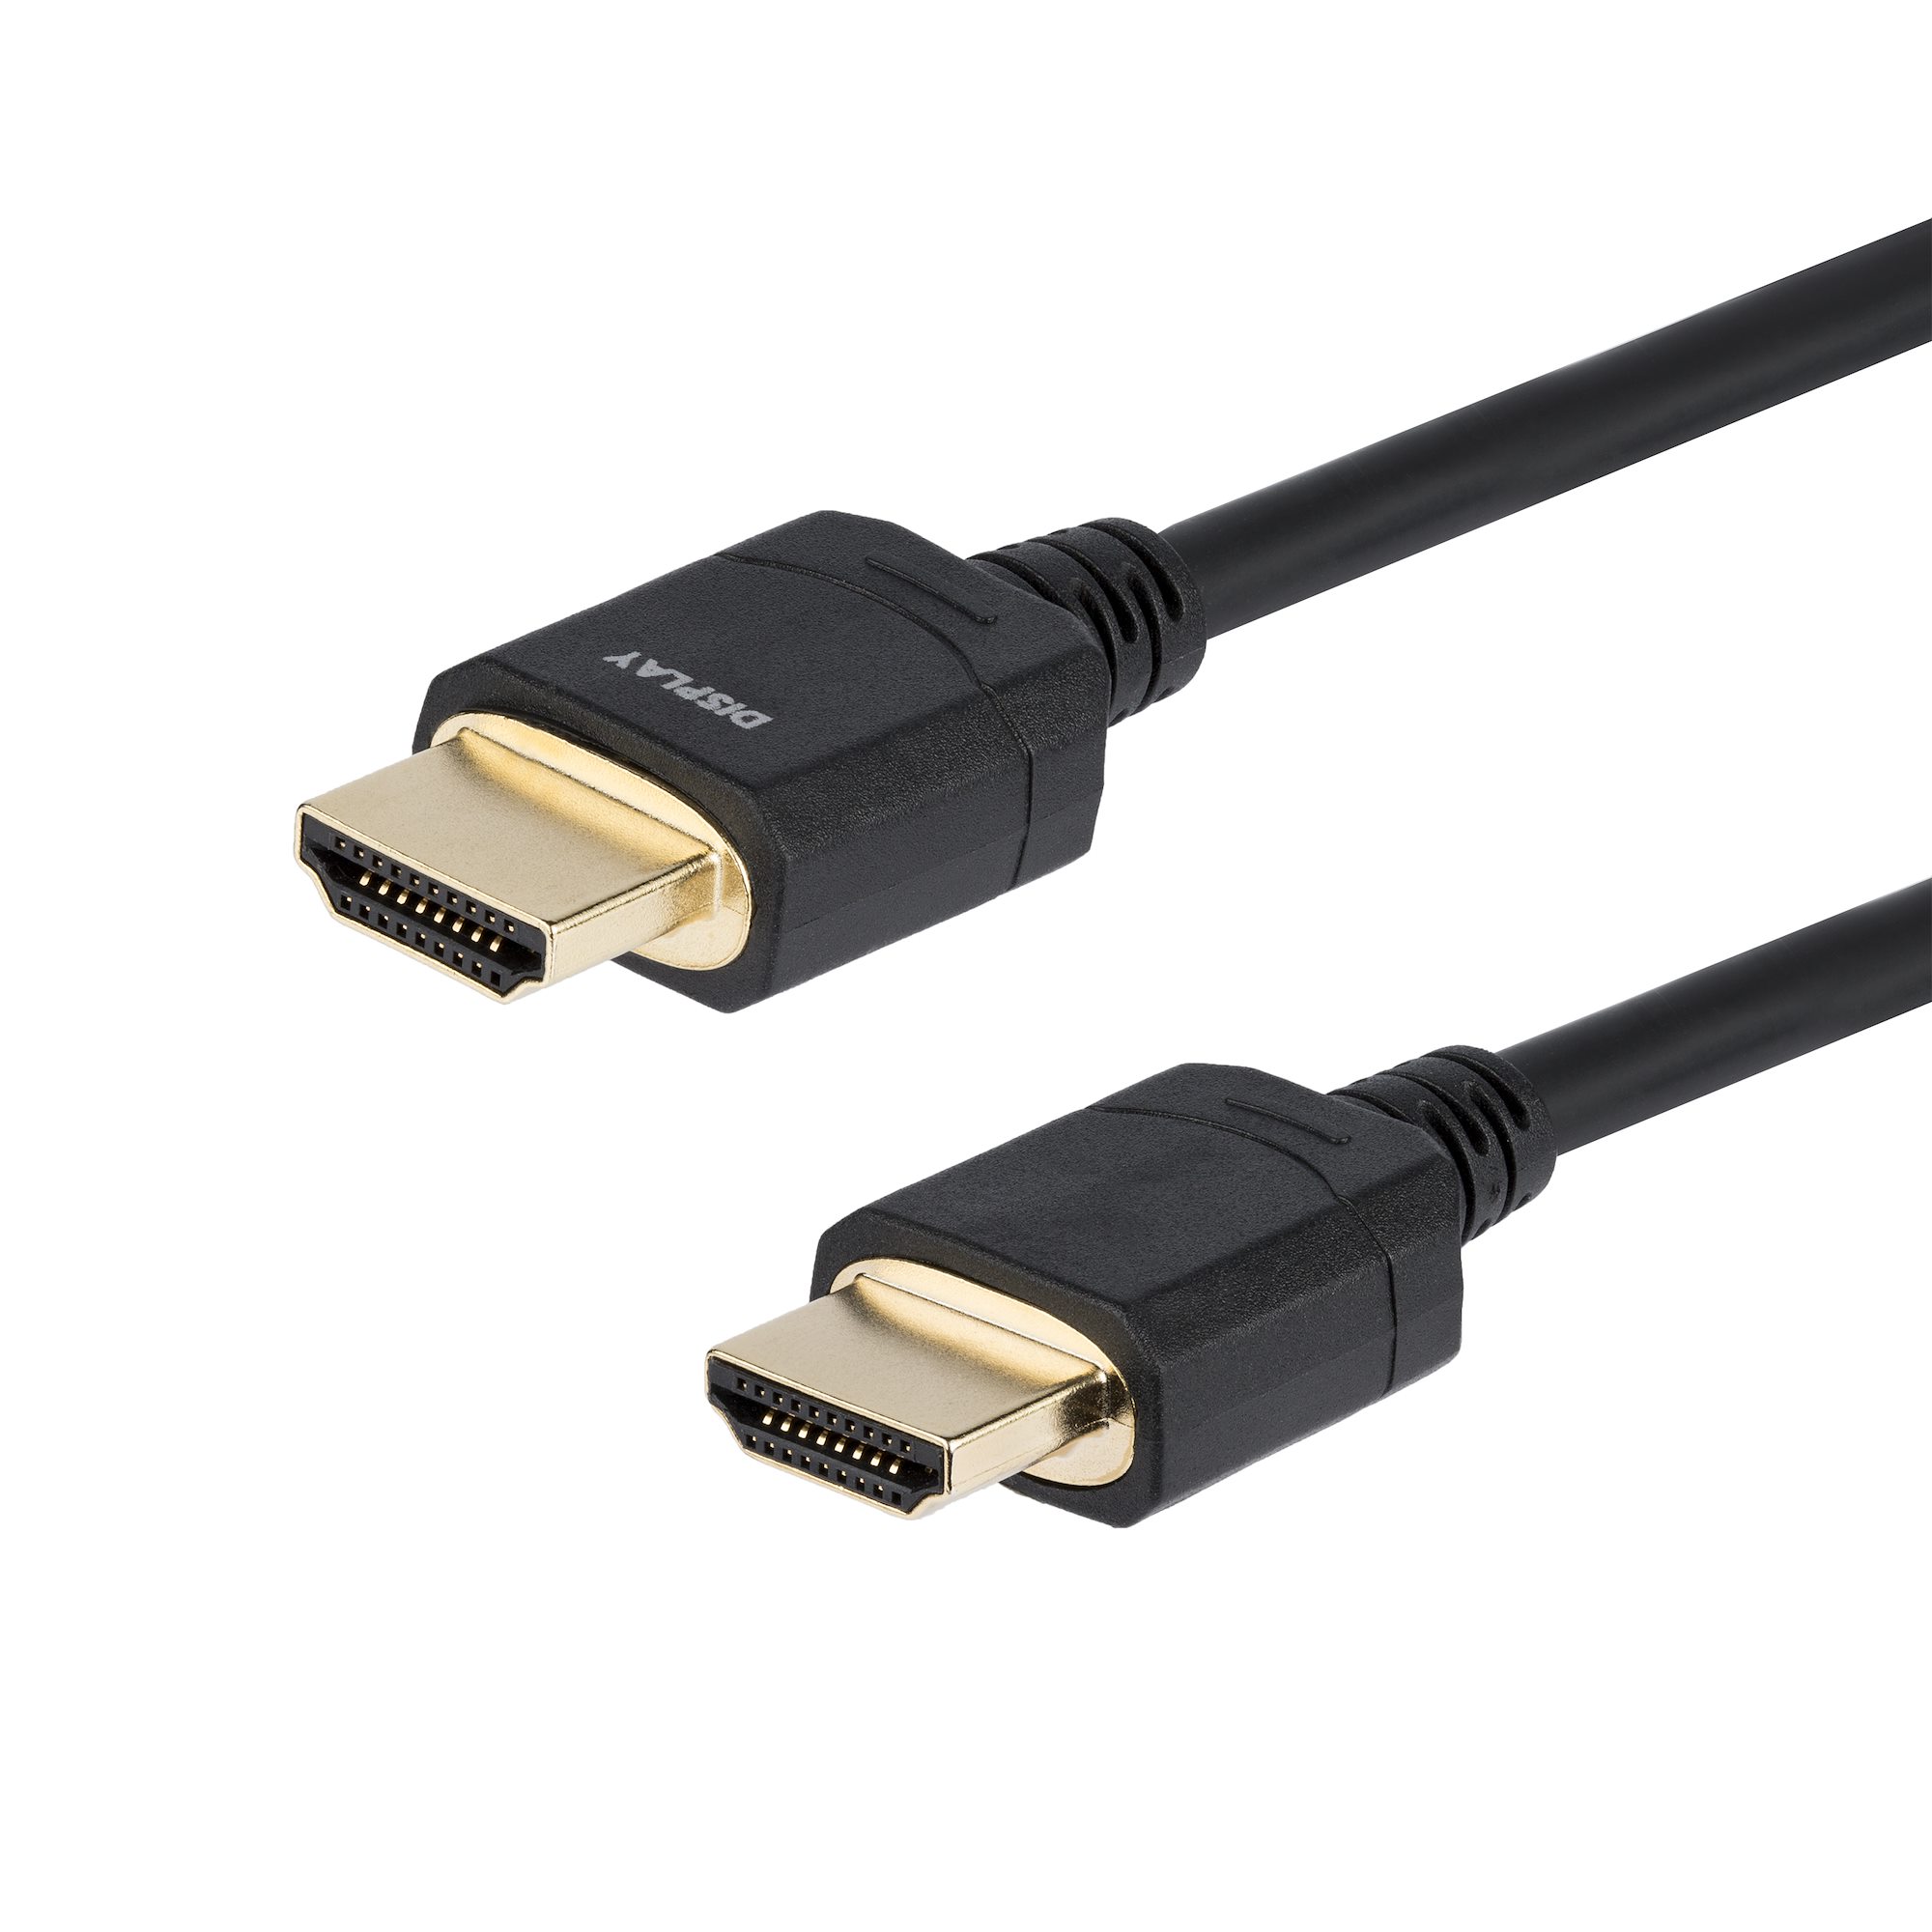 16ft/5m Certified HDMI 2.0 Cable 4K 60Hz - HDMI® Cables & HDMI Adapters